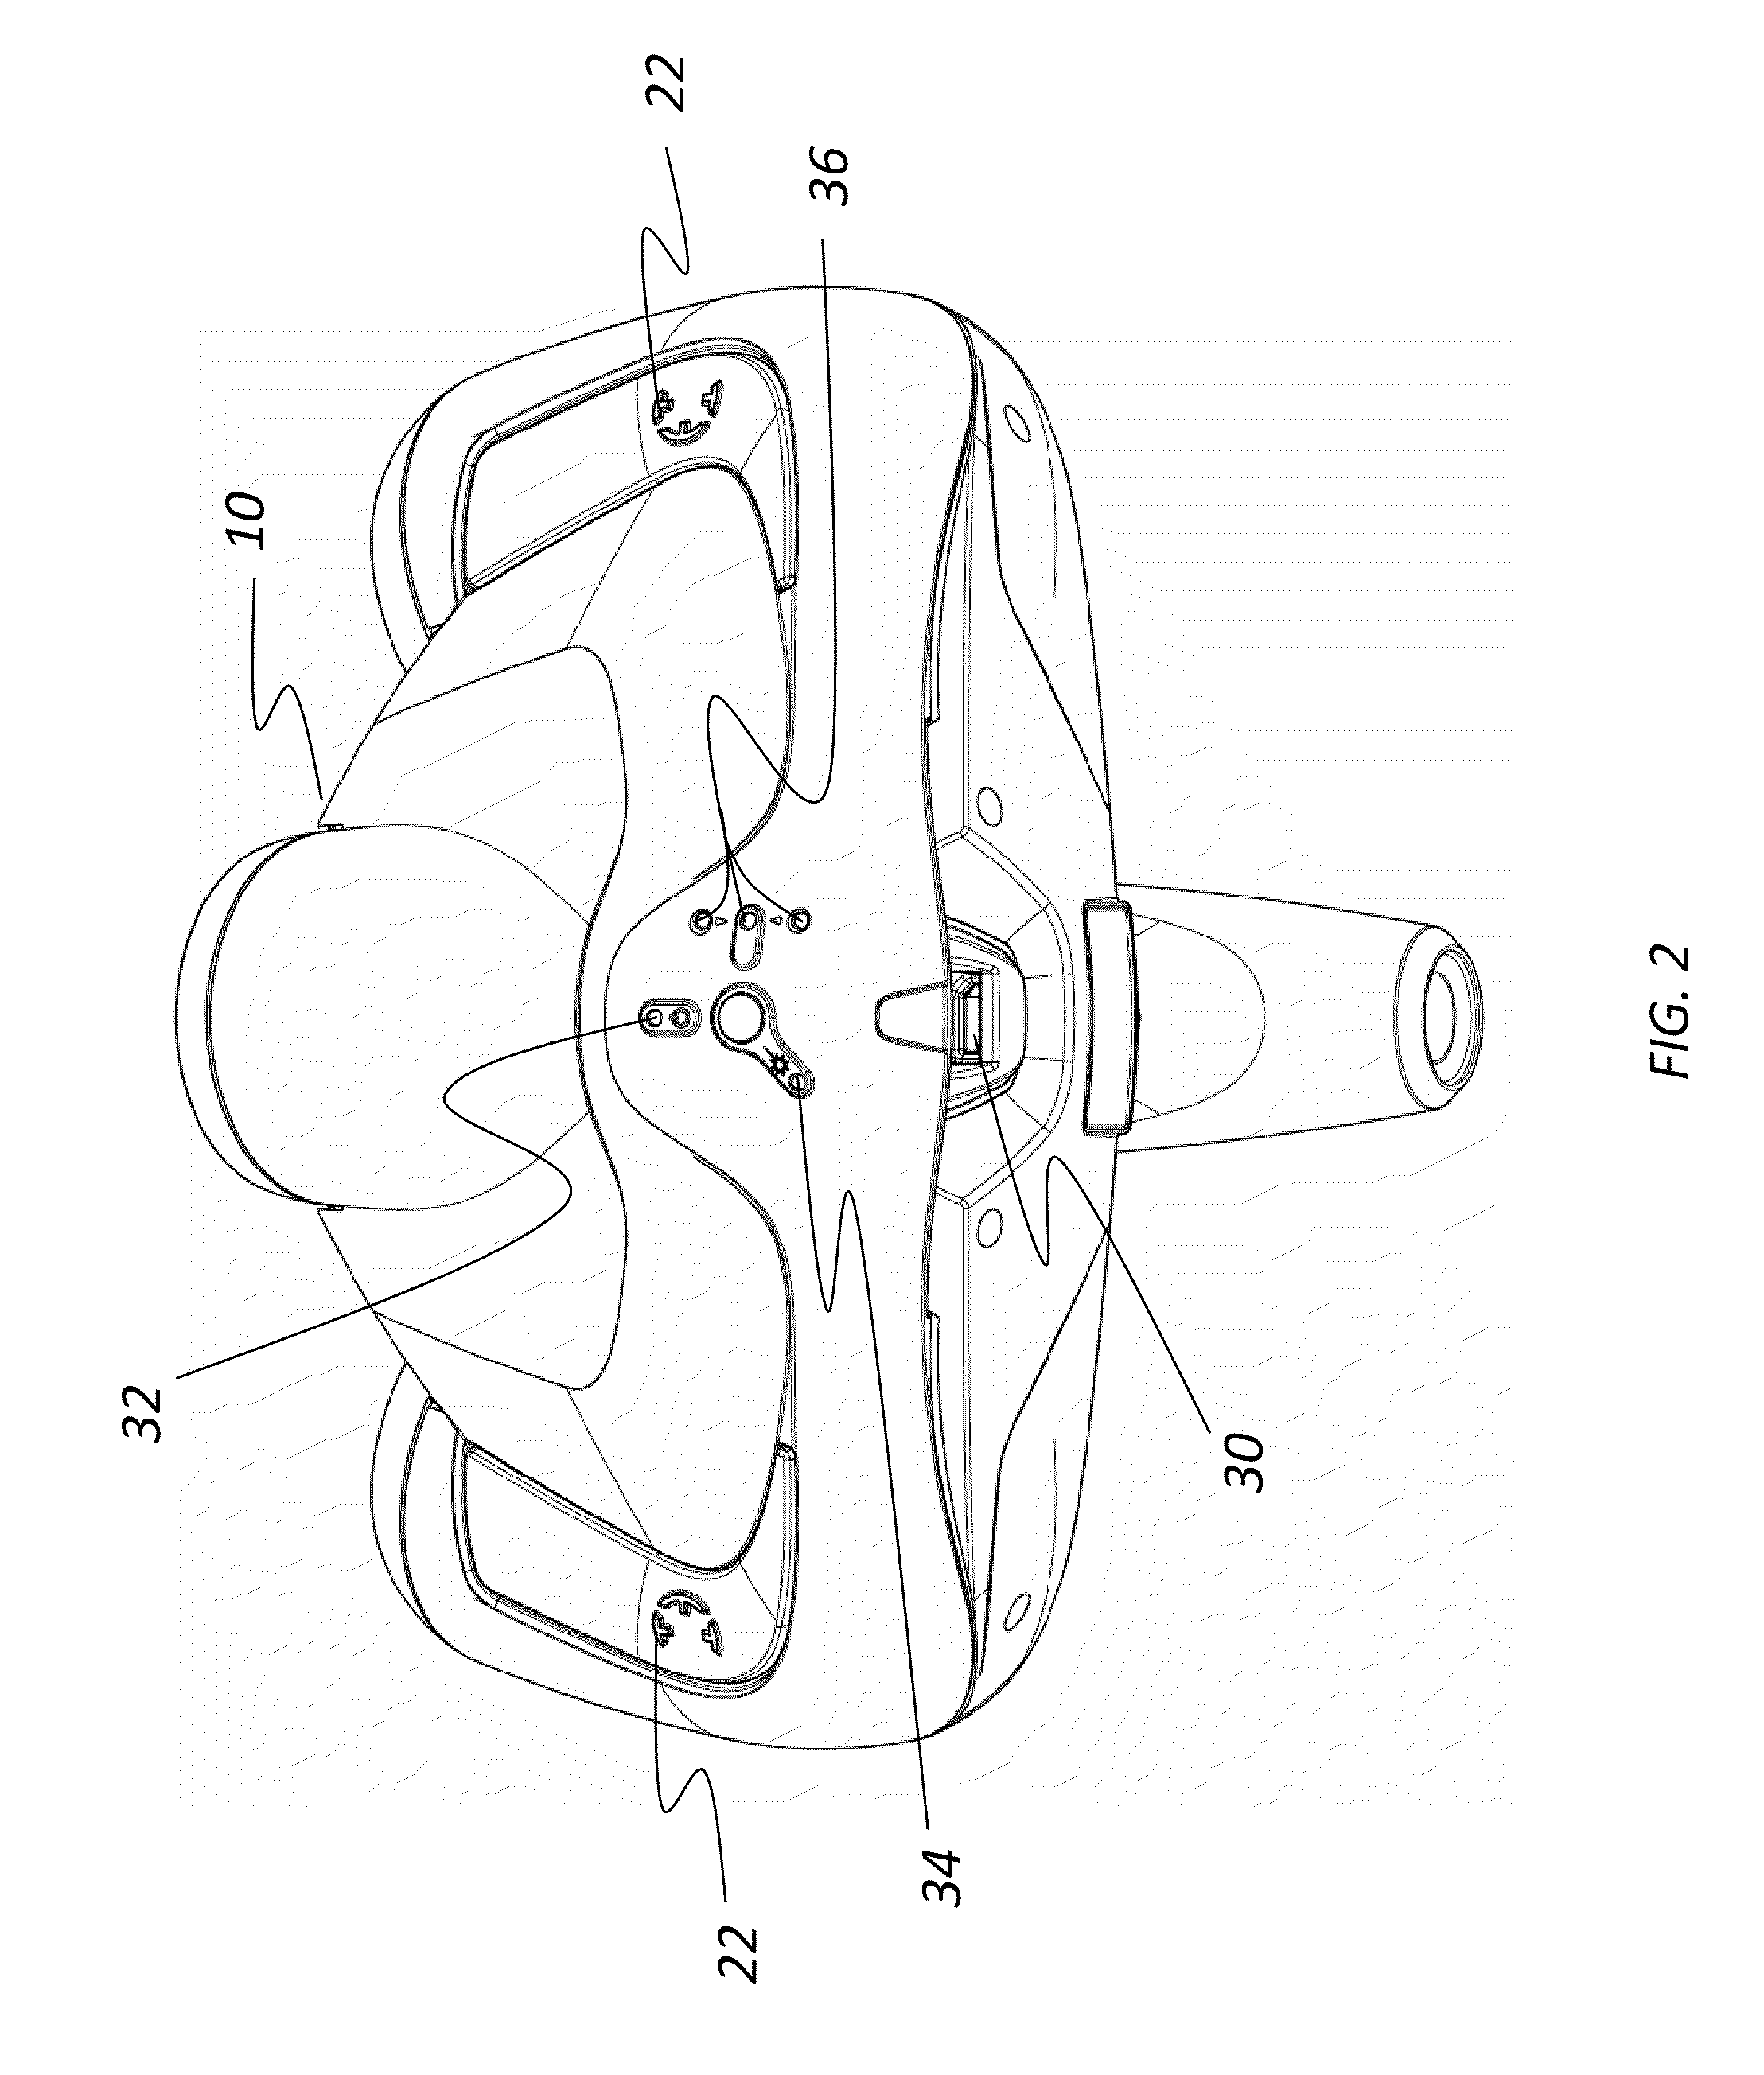 Hand-held self-referenced apparatus for three-dimensional scanning